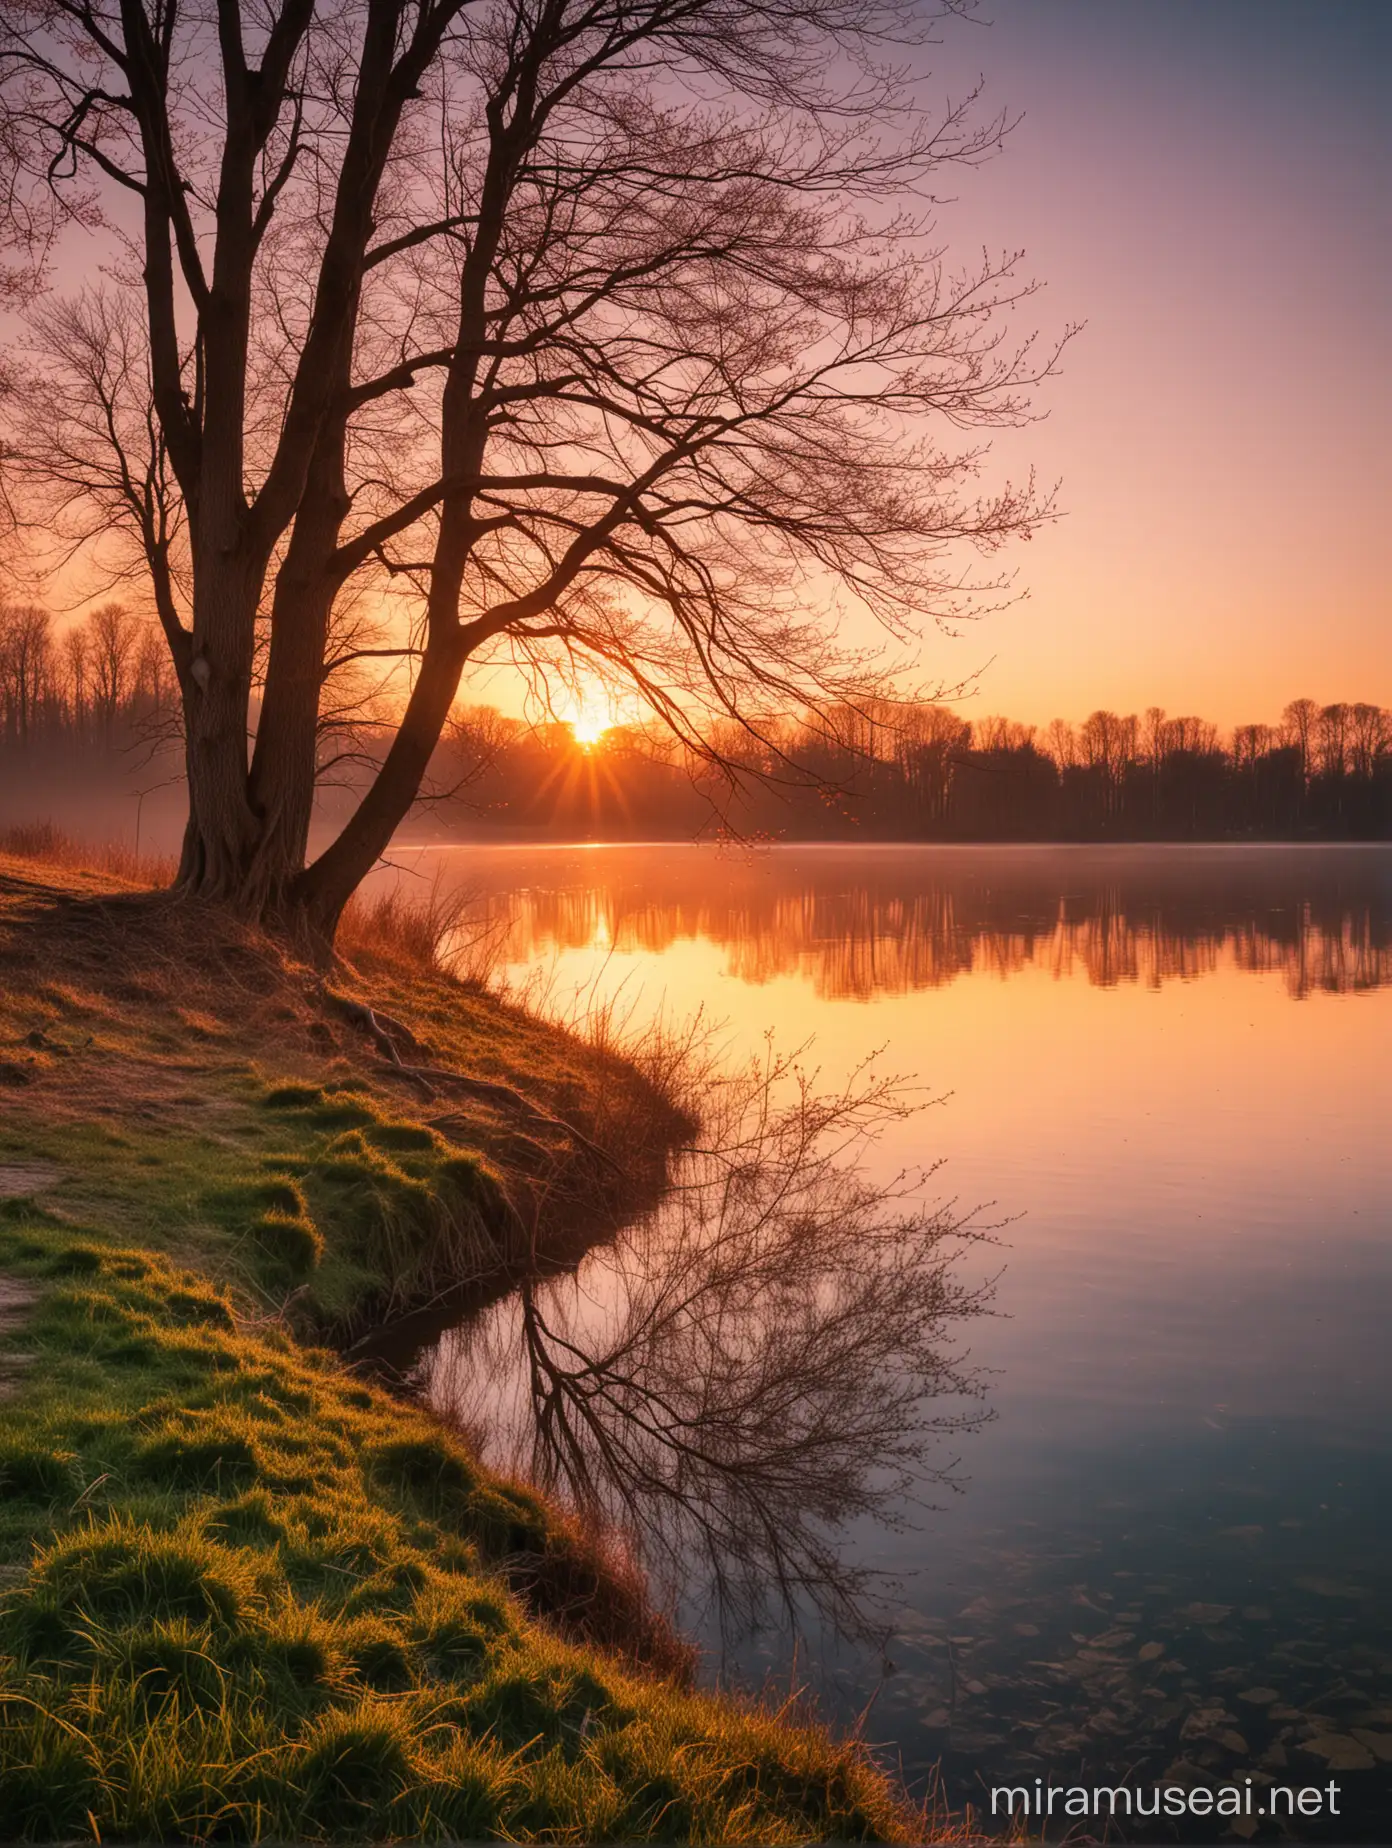 Serene Spring Sunset by a Lake Capturing Nostalgic Vibes in Vivid Colors